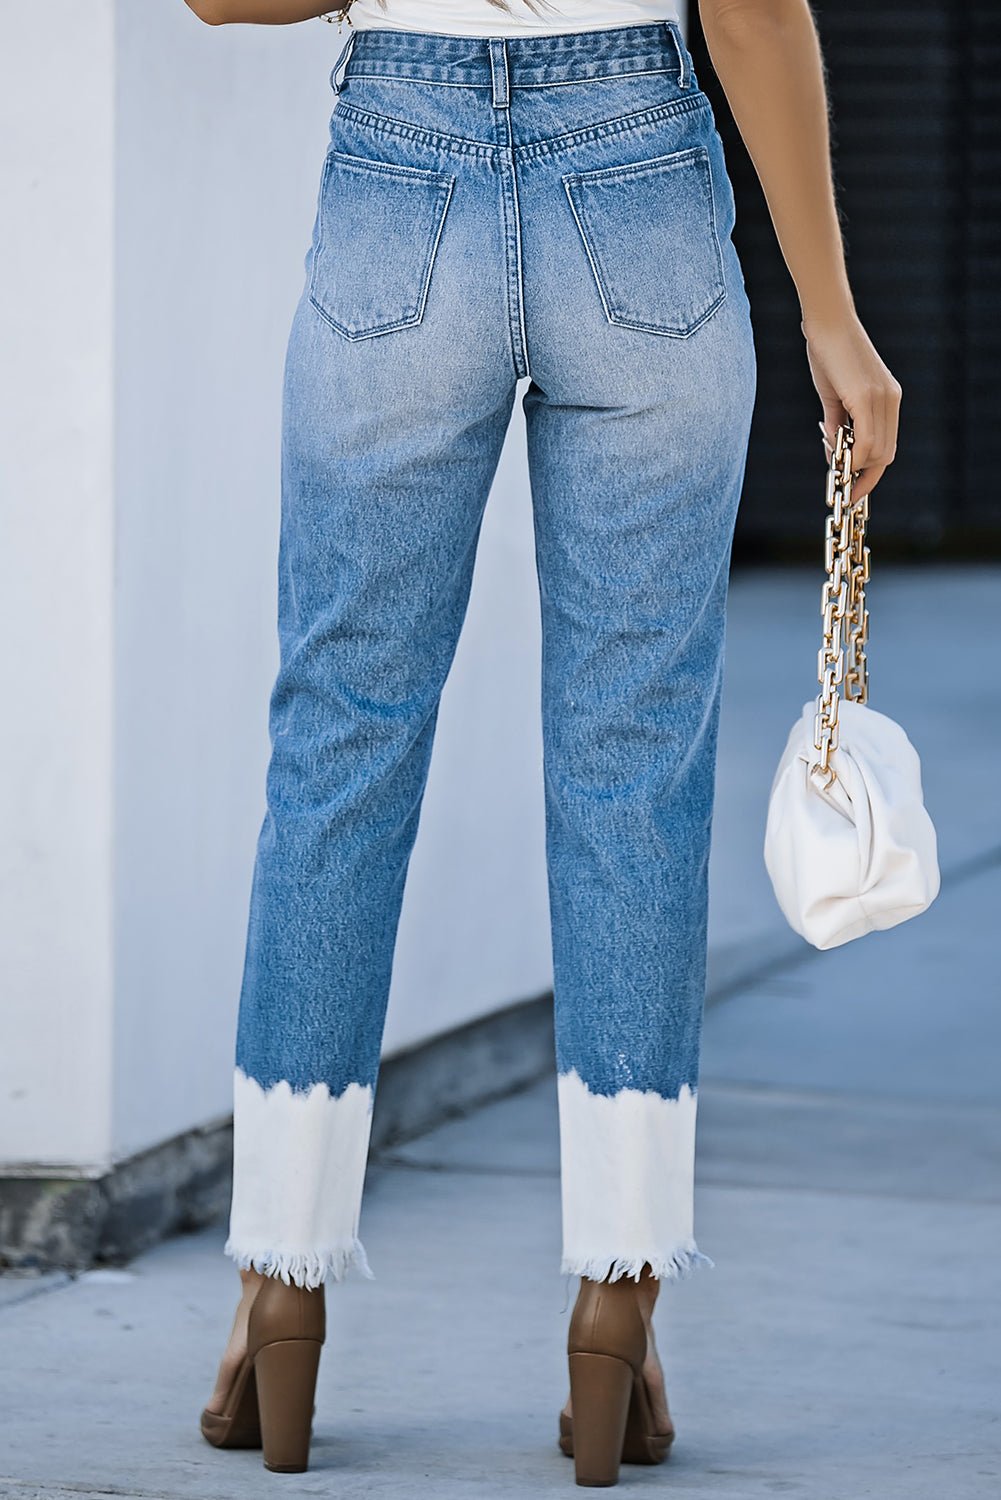 Contrast Distressed High Waist Jeans - Kinsley & Harlow